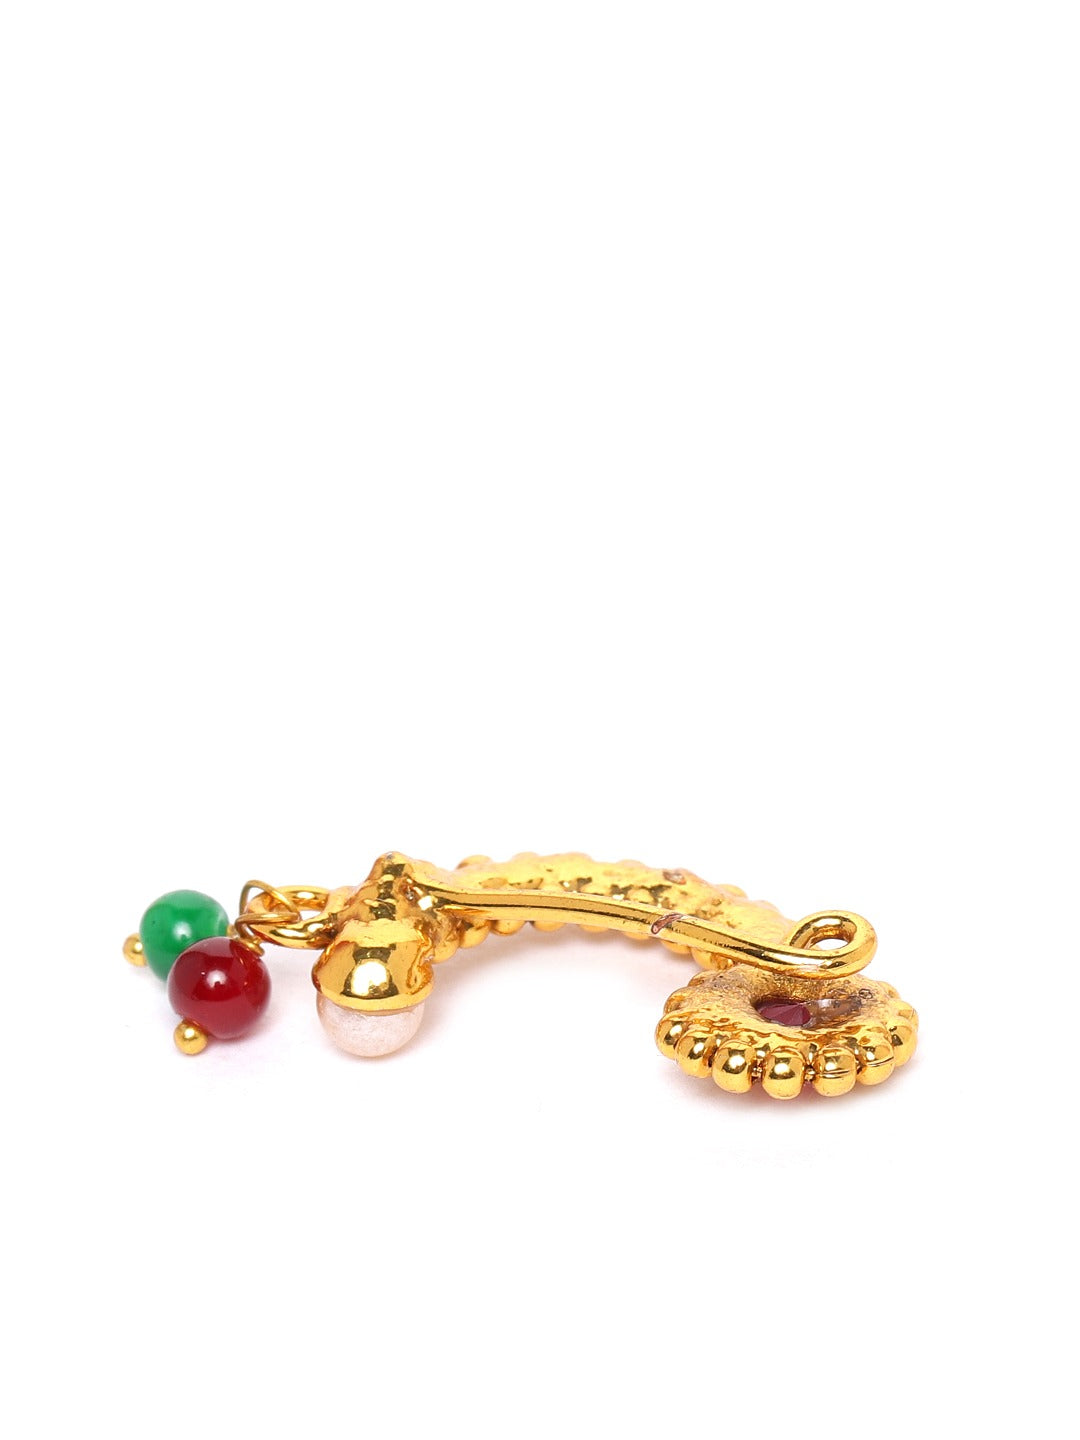 Maroon Antique Gold-Plated CZ-Studded & Beaded Marathi Nose Pin